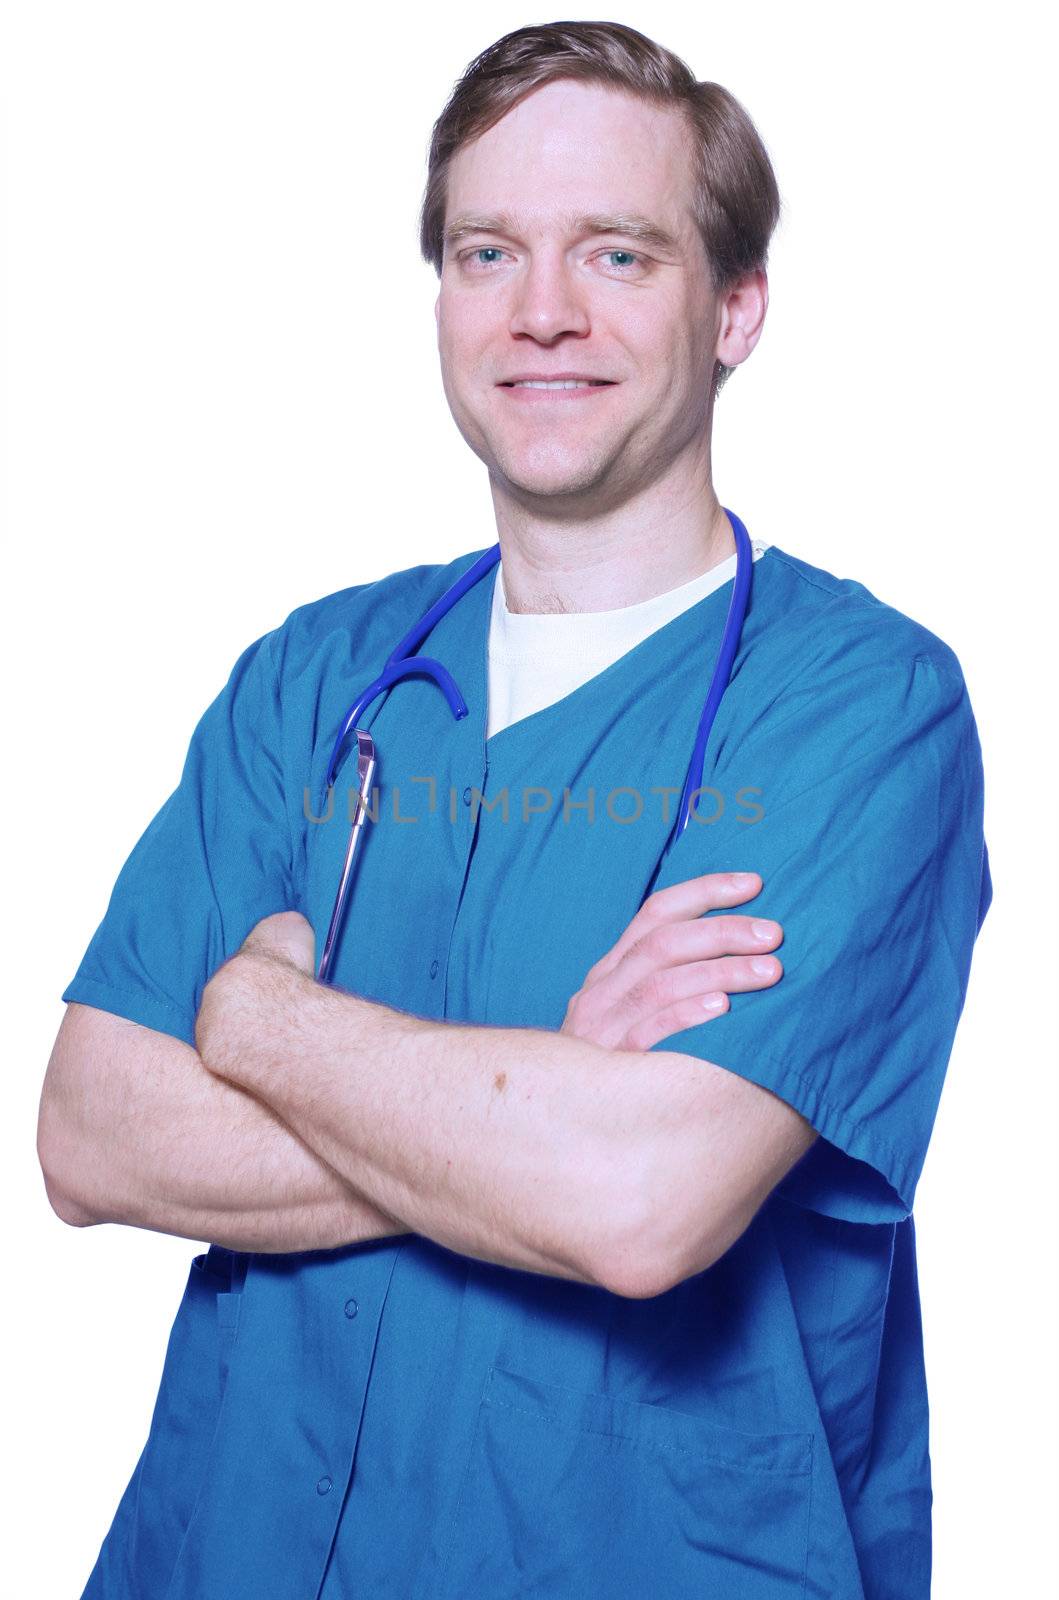 Handsome doctor smiling with arms crossed by jarenwicklund